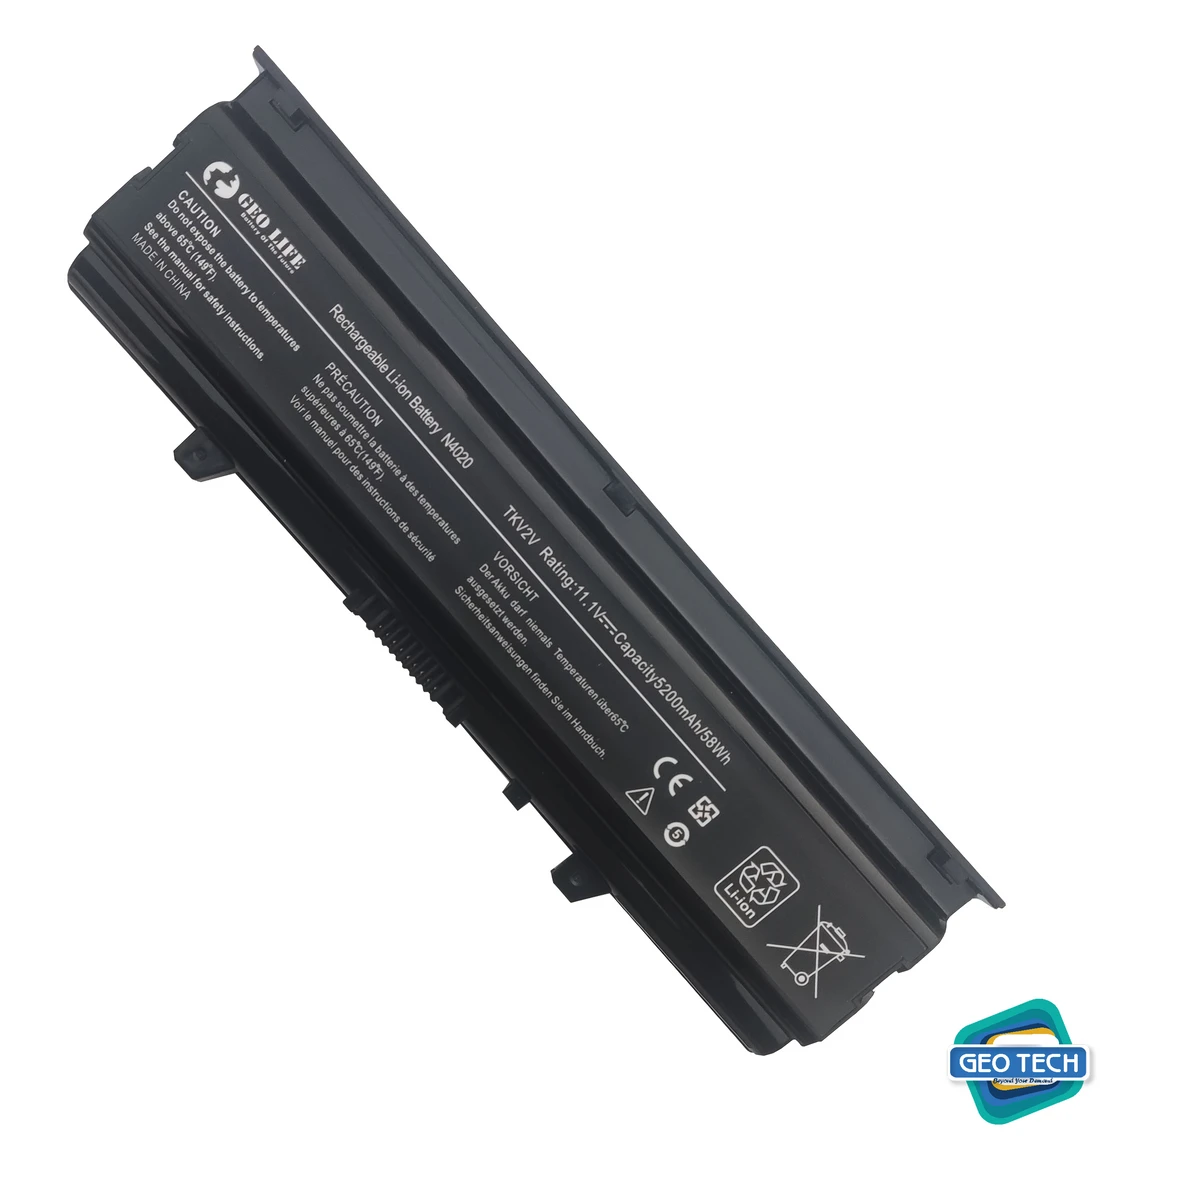 Battery Compatible with Dell Inspiron N4030 N4020 N4030D Mini 1210 14V 04J99J 0FMHC1 0M4RNN 0PD3D2 312-1231 FMHC10 KG9KY W4FYY X3X3X[11.1V/4400mAh/48Wh]